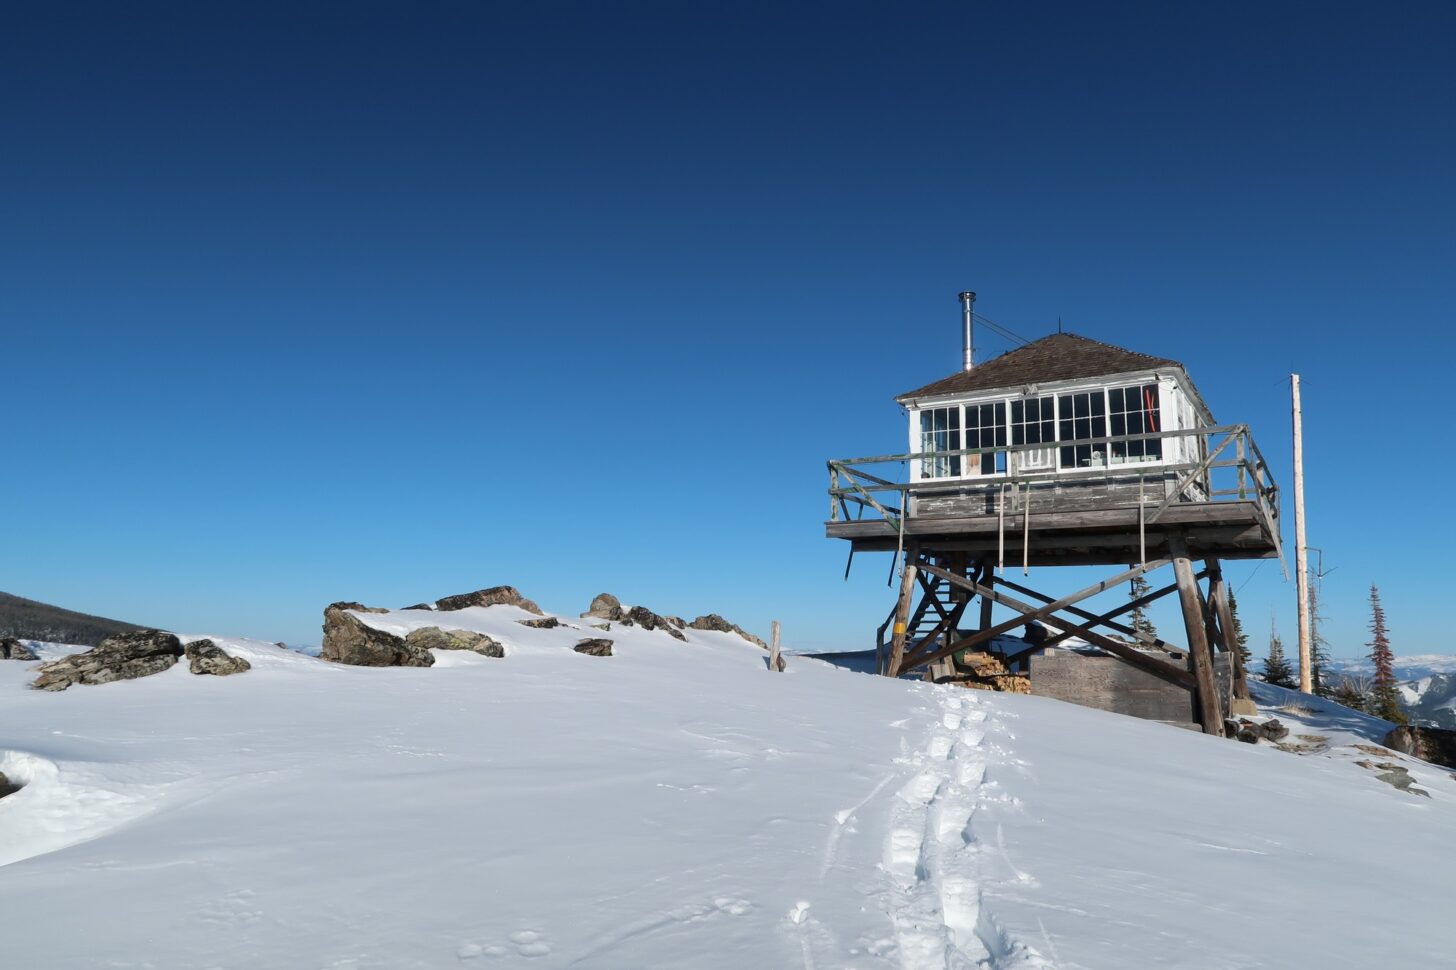 Image shows a fire lookout building on top of a mountain with snowshoe tracks leading up to it.